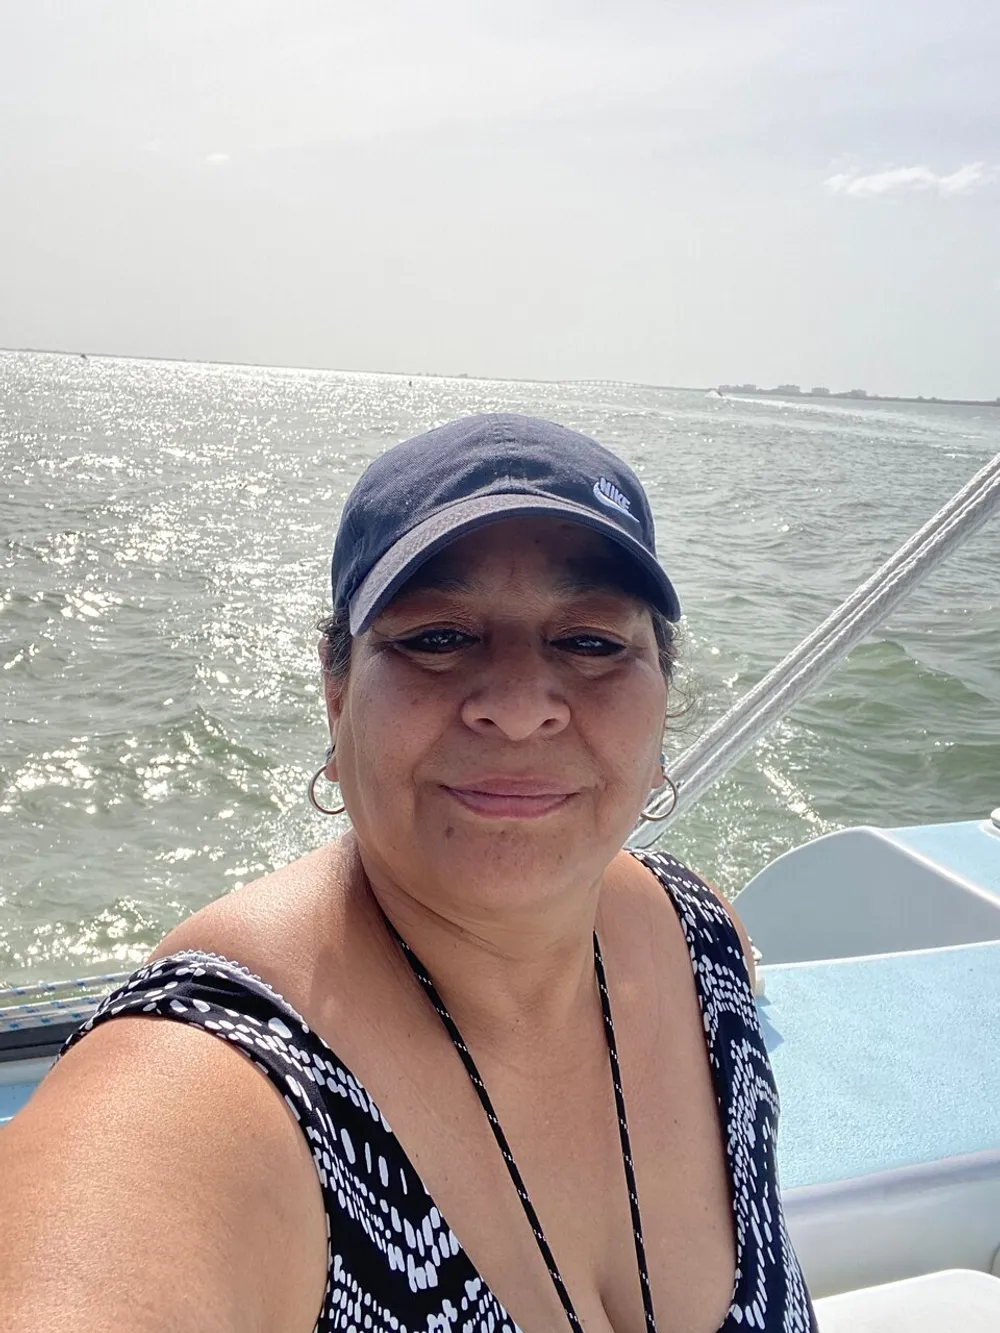 A person is taking a selfie on a sunny day while on a boat with shimmering water in the background